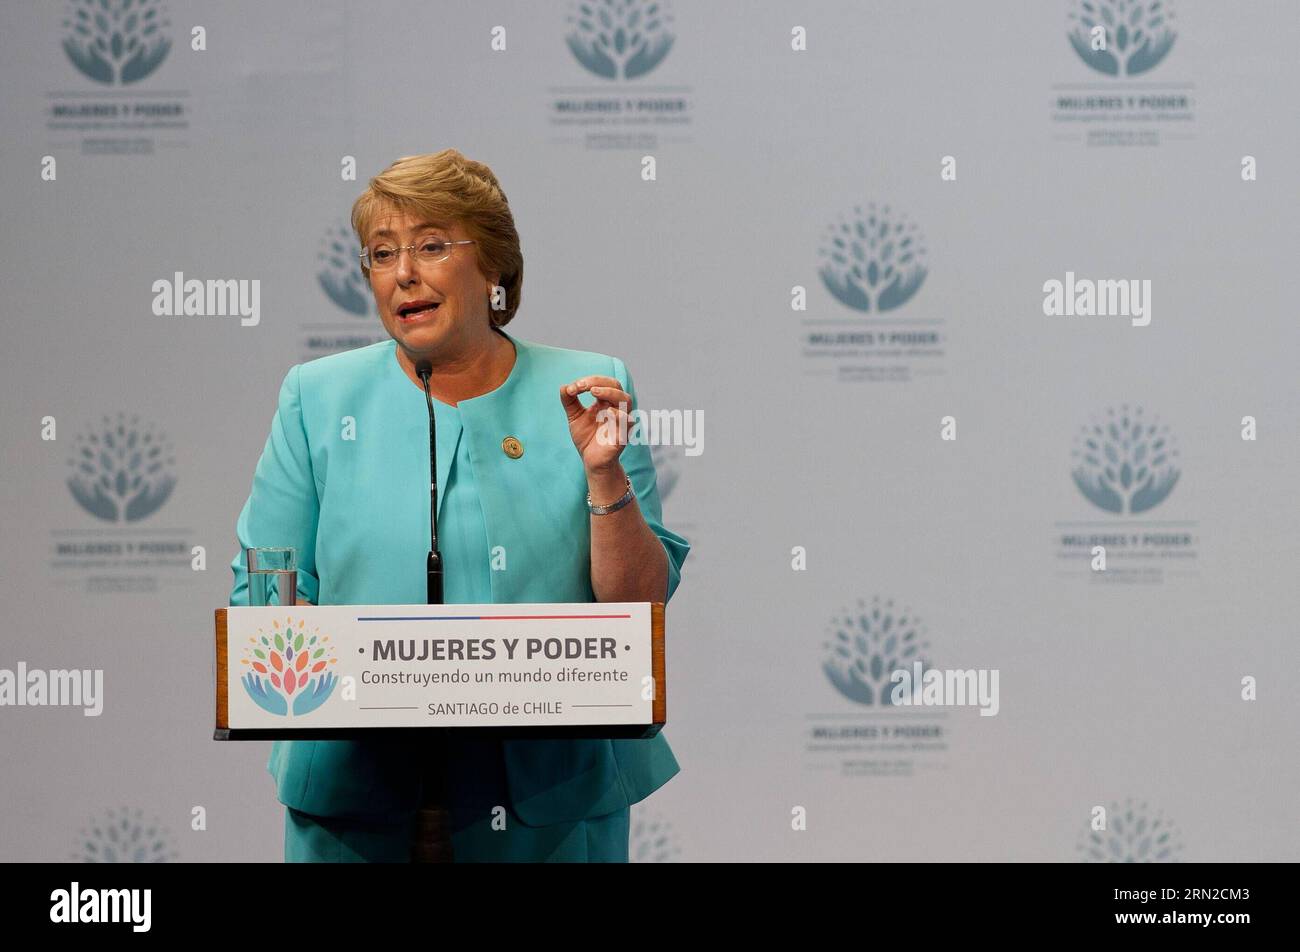 (150227) -- SANTIAGO, Feb. 27, 2015 -- Chile s President Michelle Bachelet delivers a speech during the Women in Power and Decision Making: Building a Different World forum opening ceremony, in Mapocho Station, in Santiago, capital of Chile, on Feb. 27, 2015. Women in Power and Decision Making: Building a Different World forum held on Feb. 27 and 28 was organized by Ministry of Foreign Affairs and the National Women s Service of Chilean Government, in collaboration with the UN Women entity, according to local press. Jorge Villegas) (jg) CHILE-SANTIAGO-UN-FORUM e JORGExVILLEGAS PUBLICATIONxNOTx Stock Photo